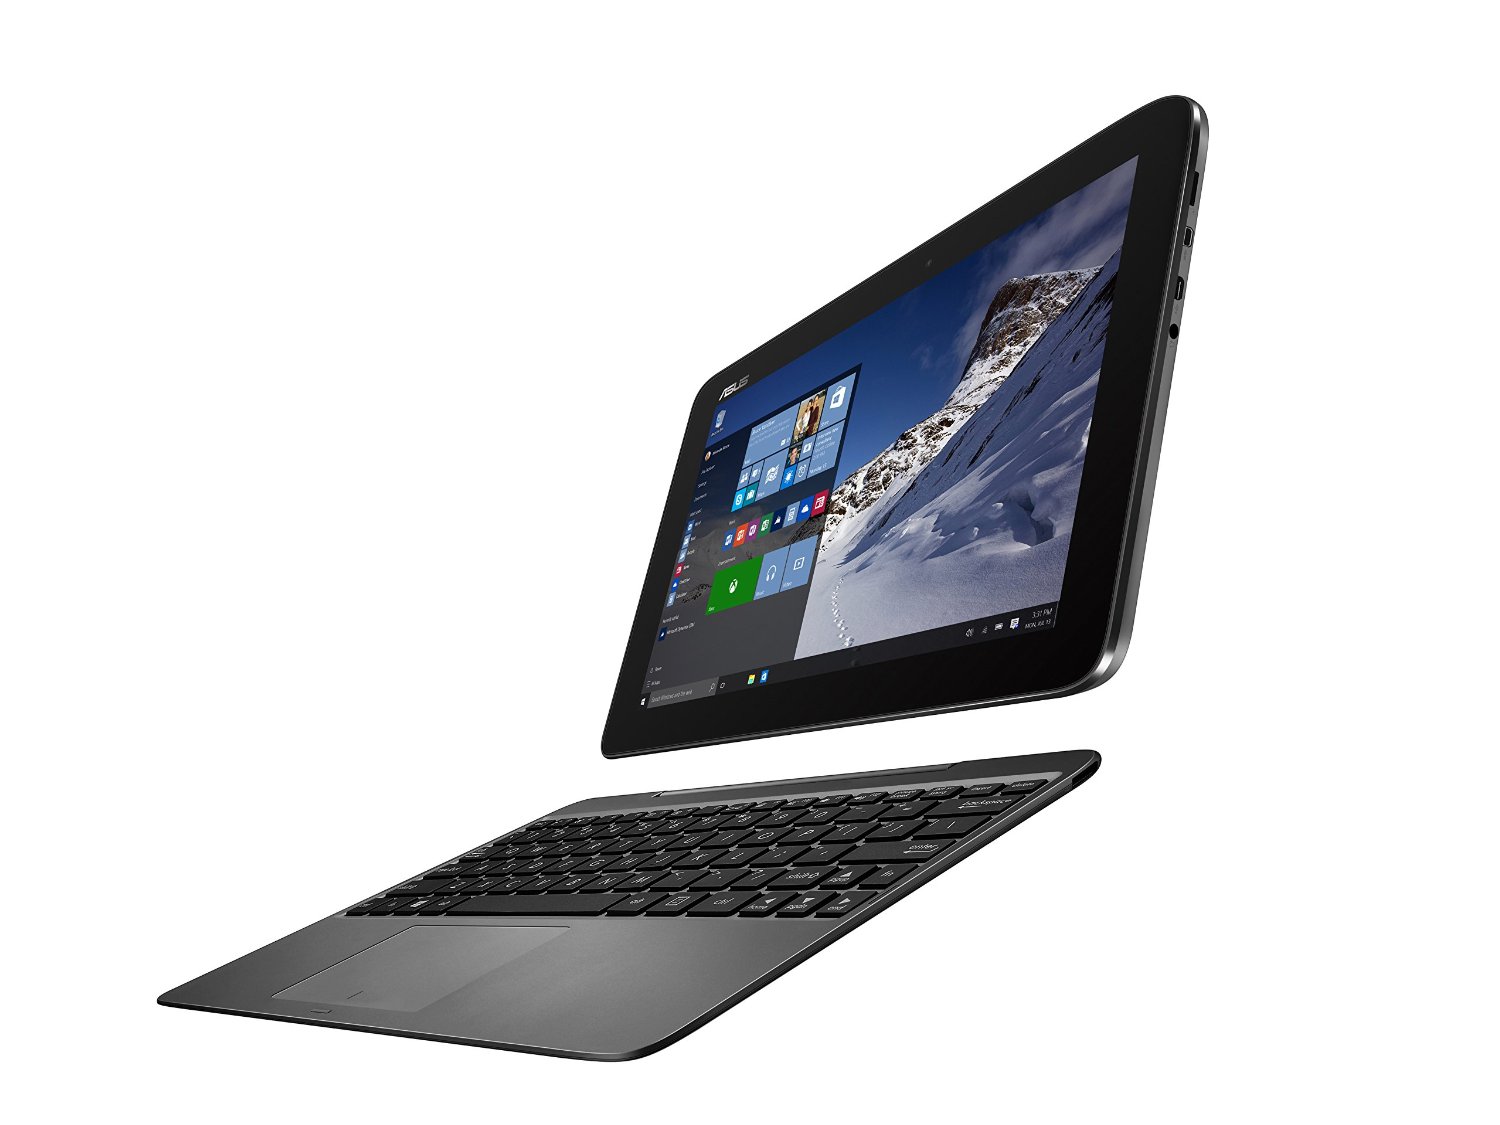 2-in-1 Laptops and Tablets